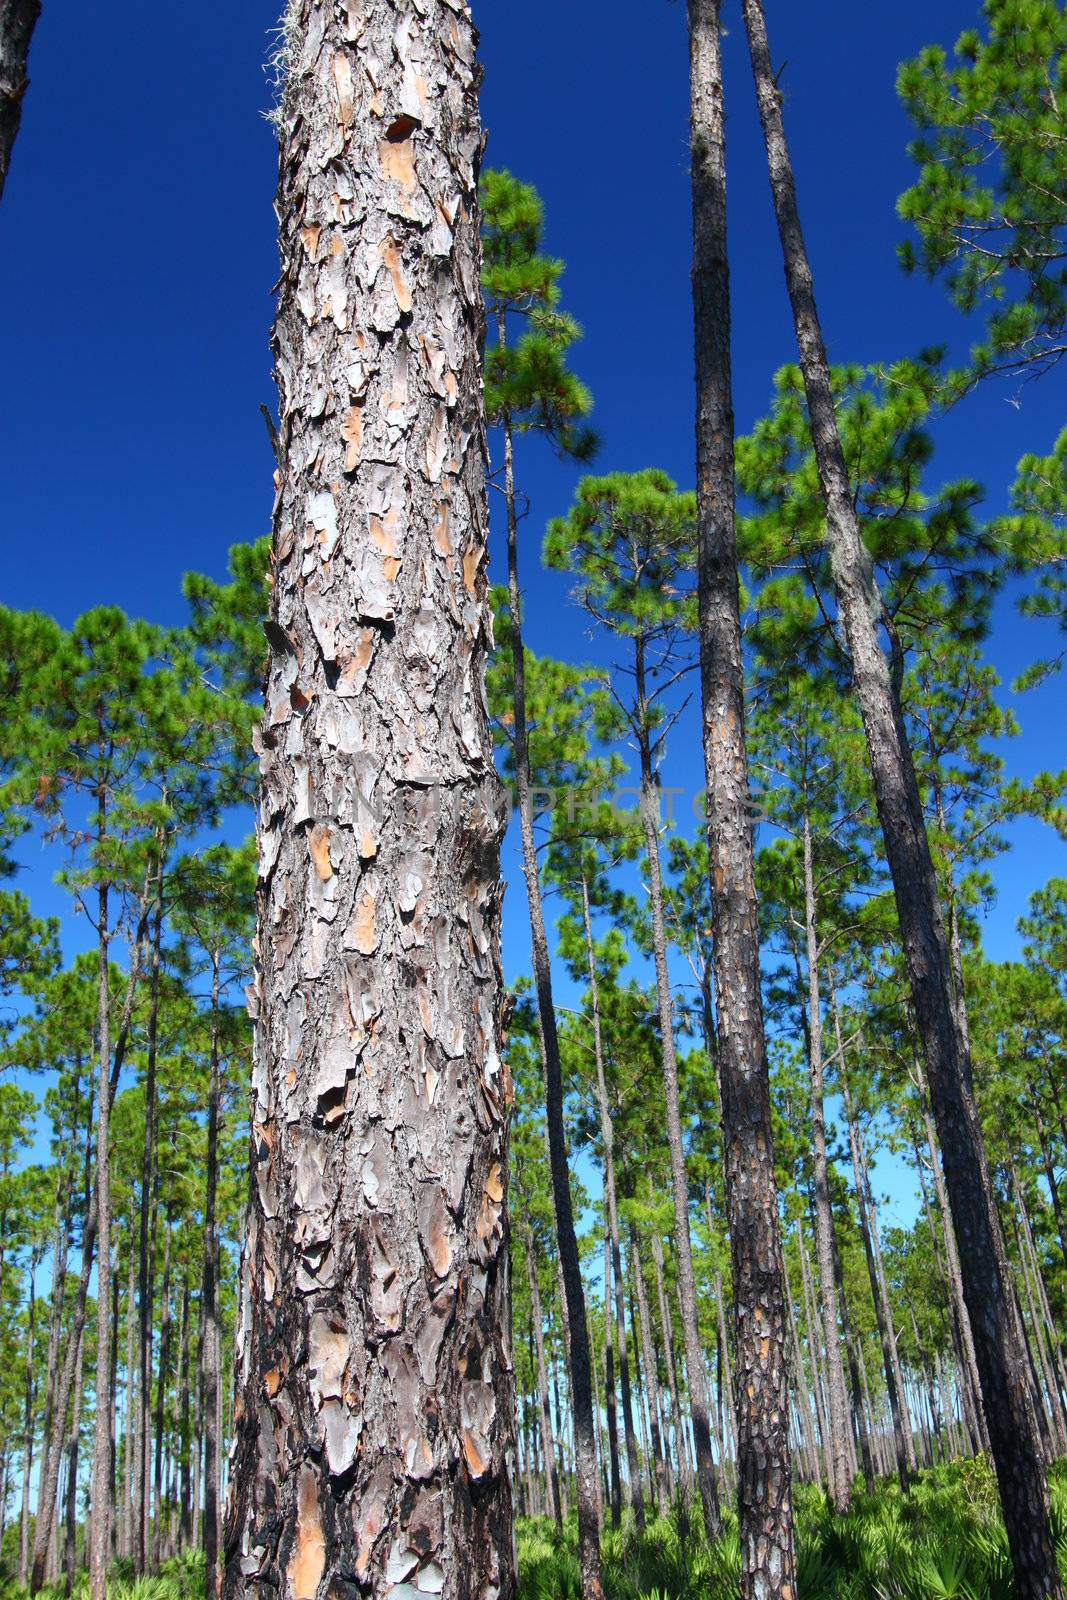 The beautiful pine flatwoods of Florida on a clear day.